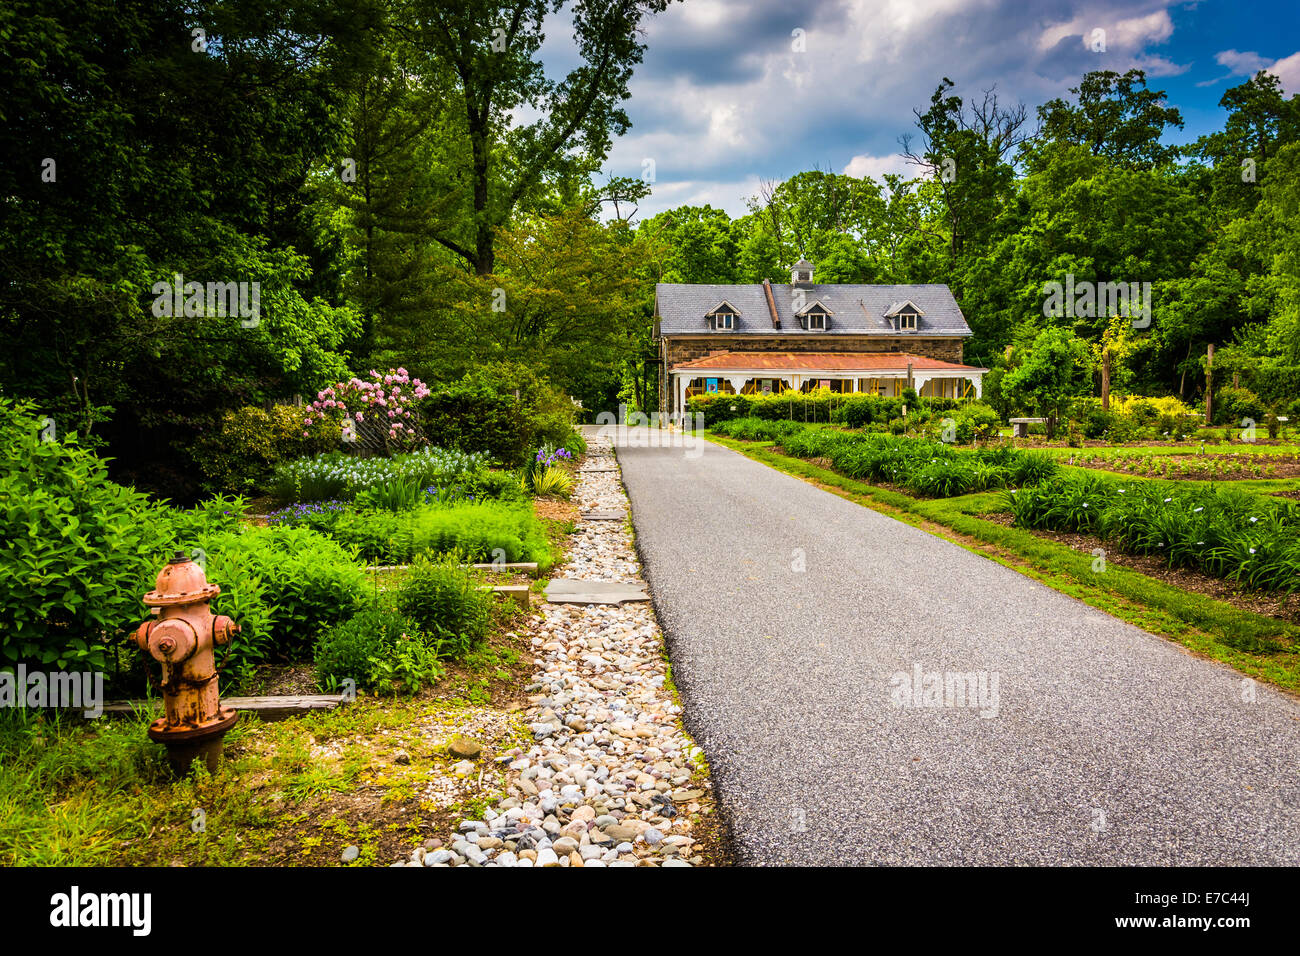 Gardens and a paved path at Cylburn Arboretum, in Baltimore, Maryland. Stock Photo